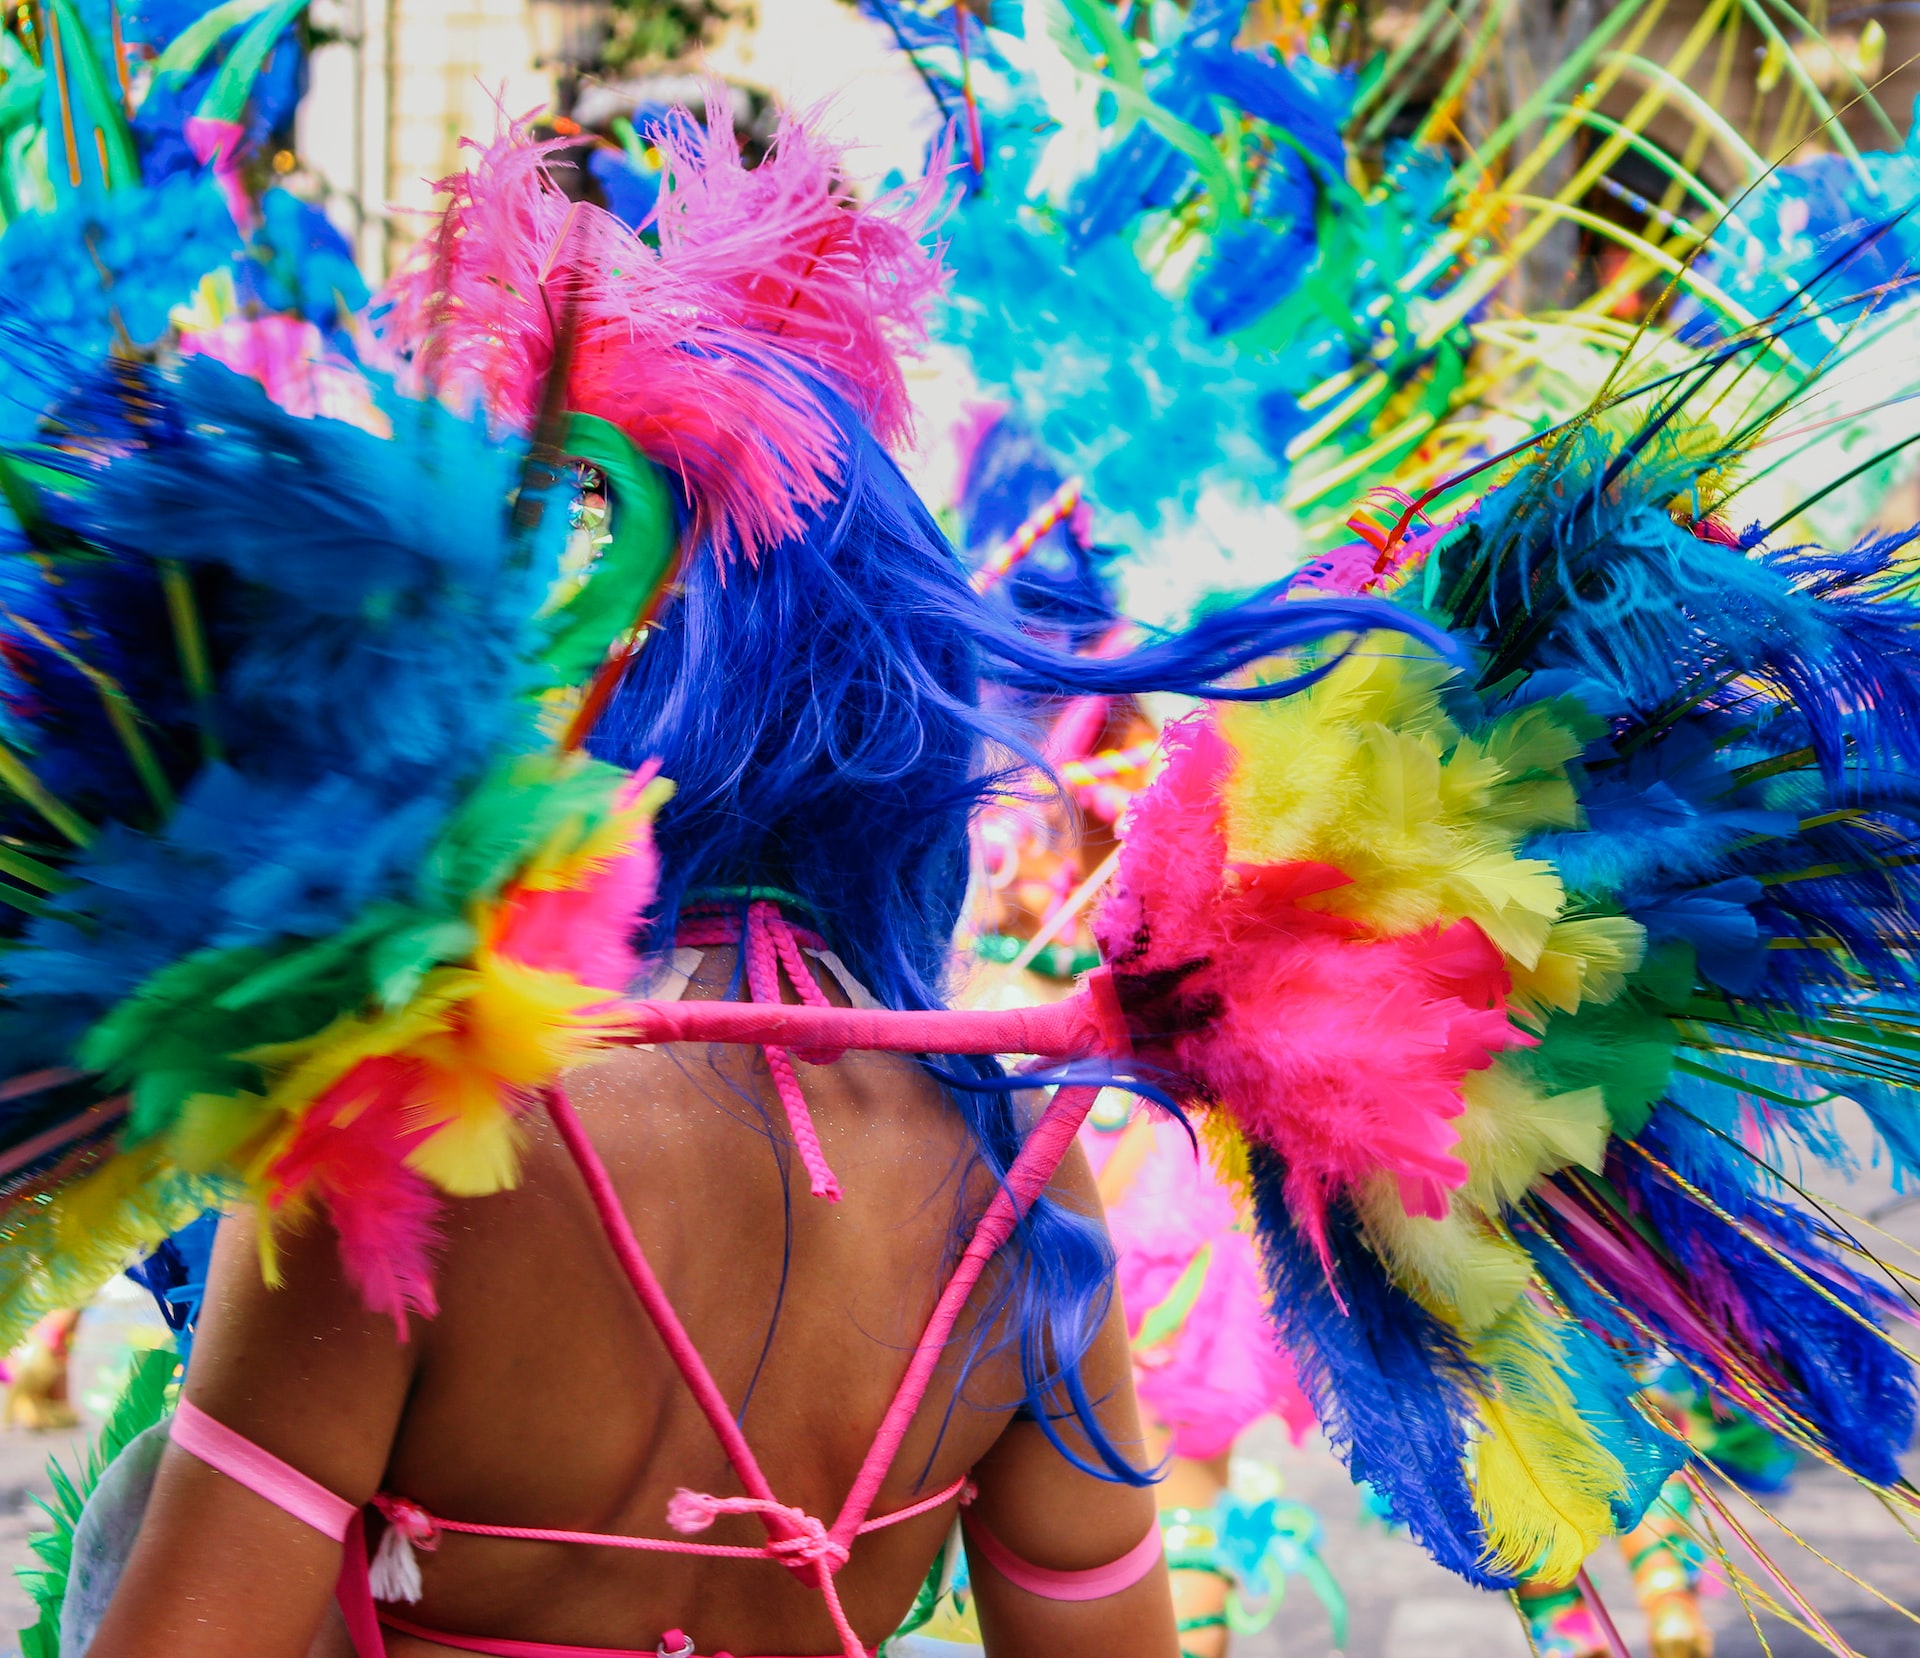 A woman wearing multicolored feathers and bikini with blue hair during Mardi Gras.